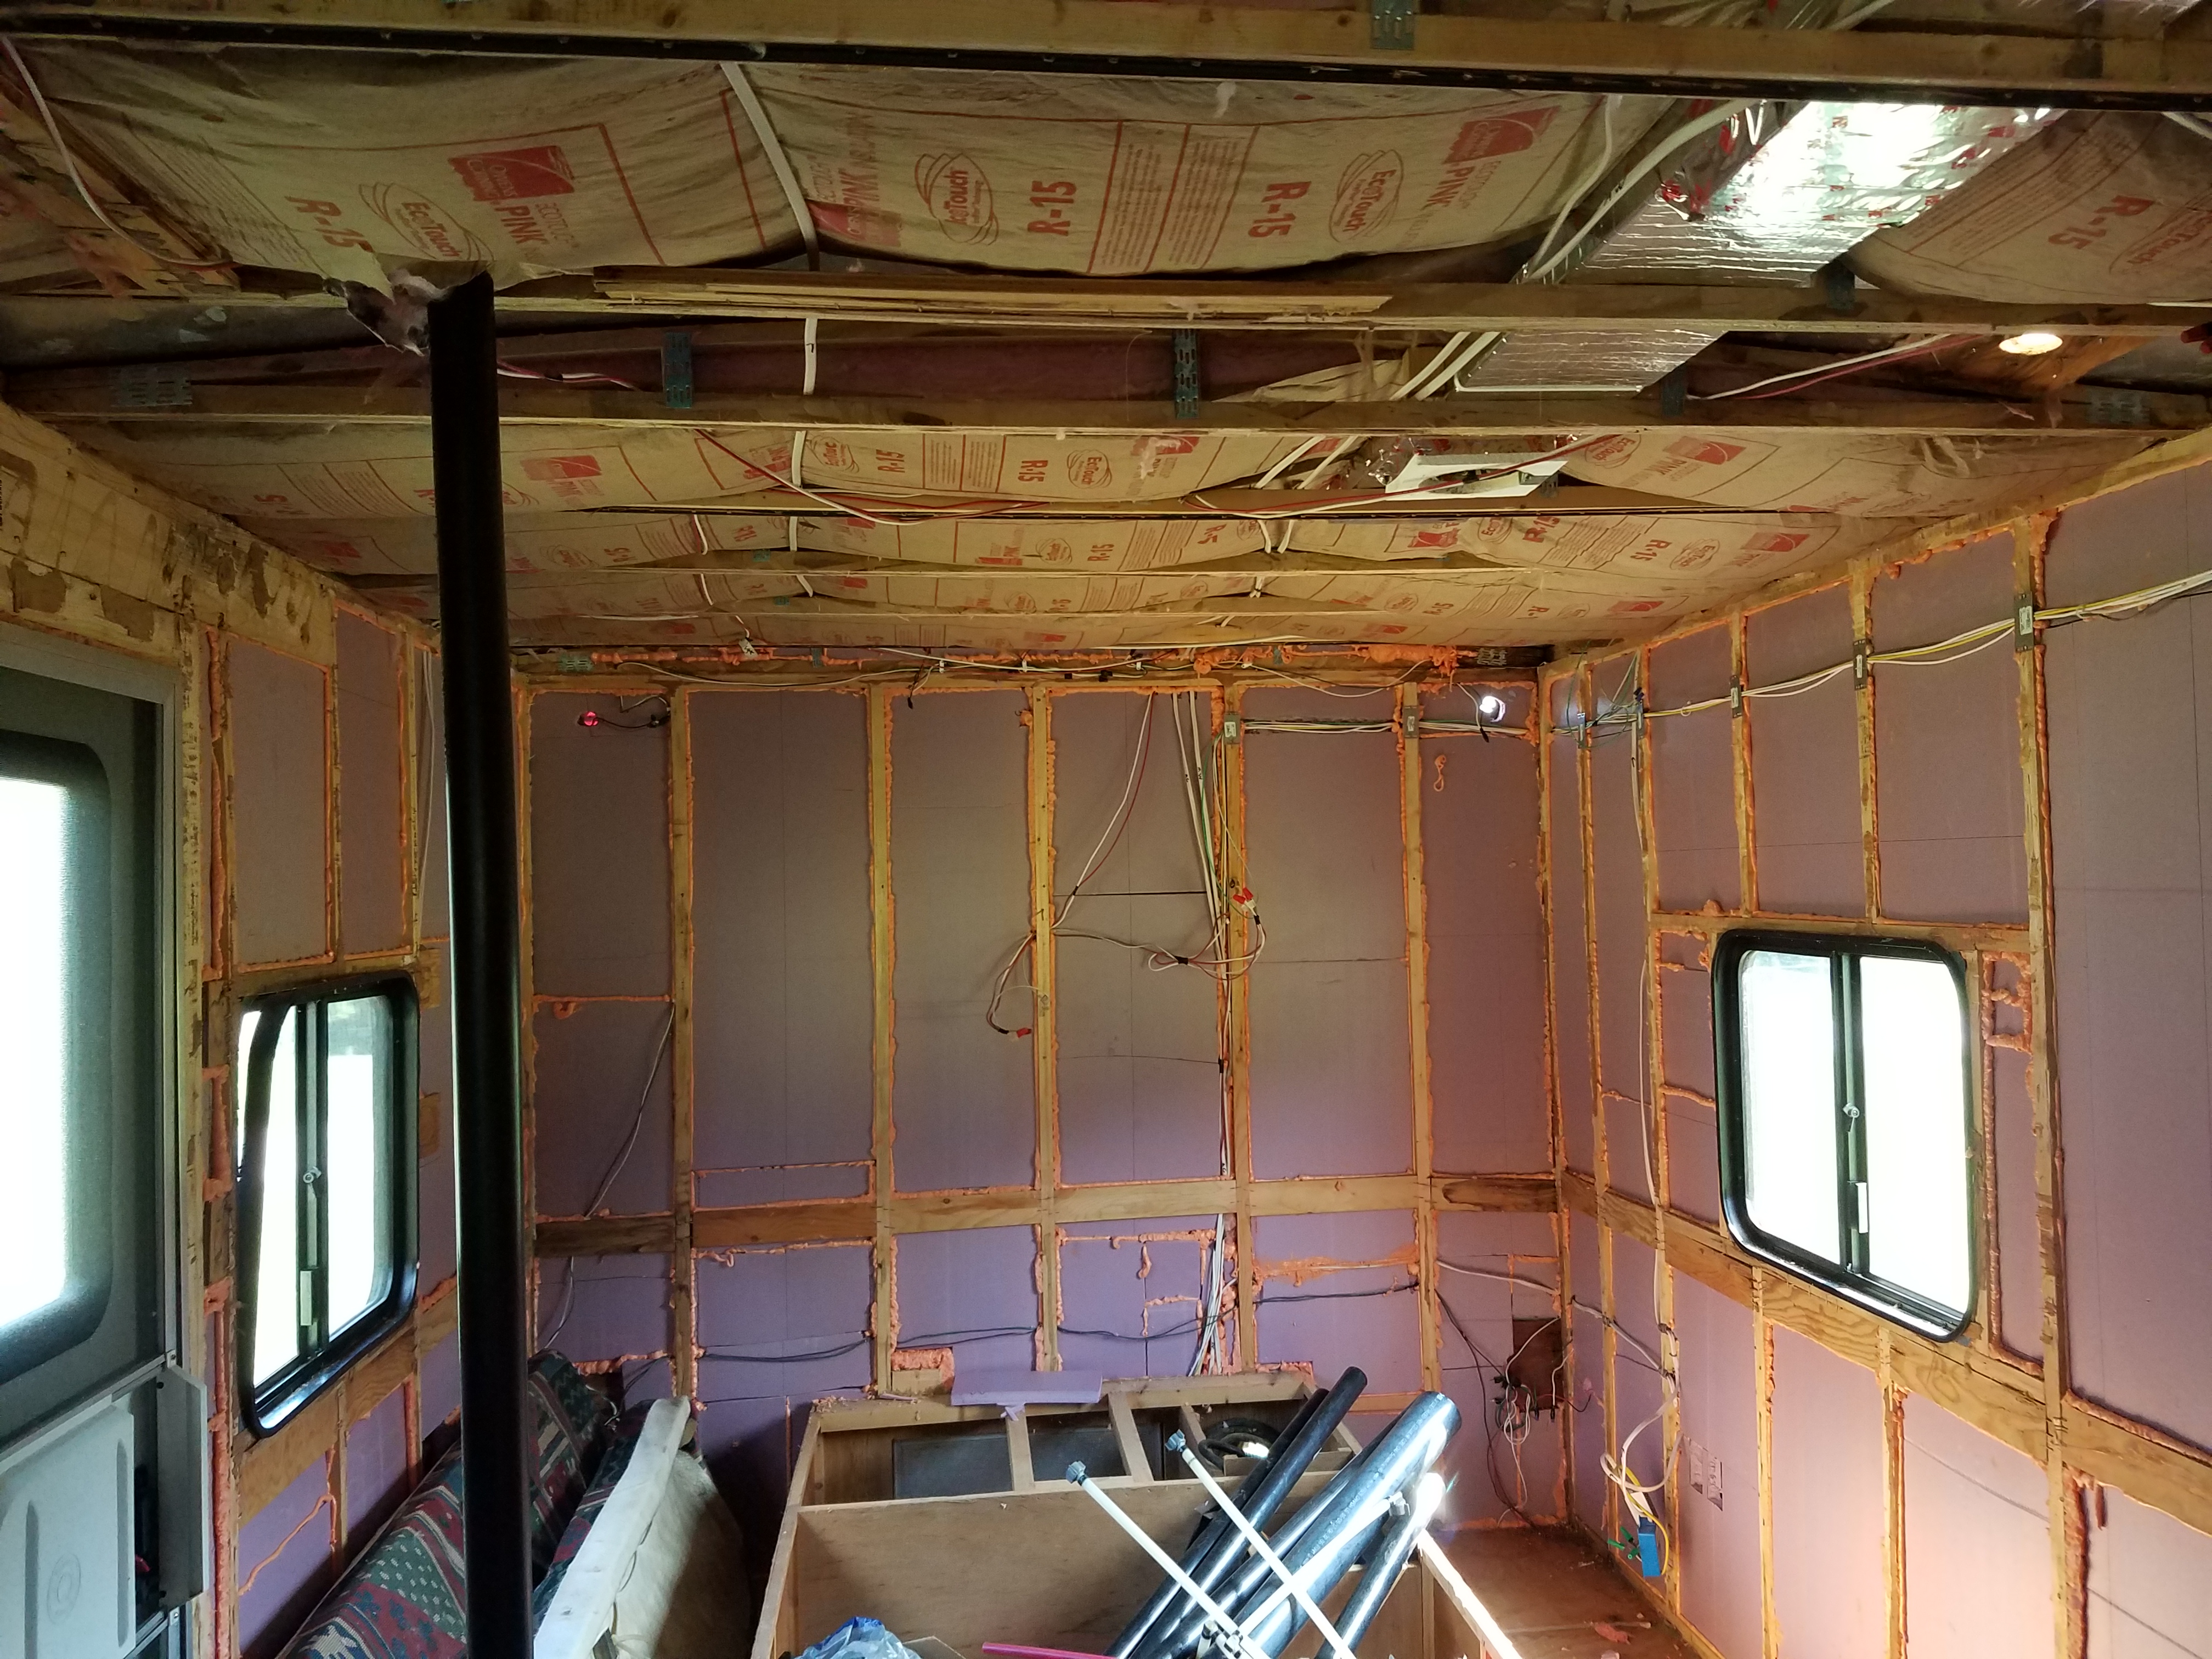 The inside of the travel trailer fully insulated walls and ceiling